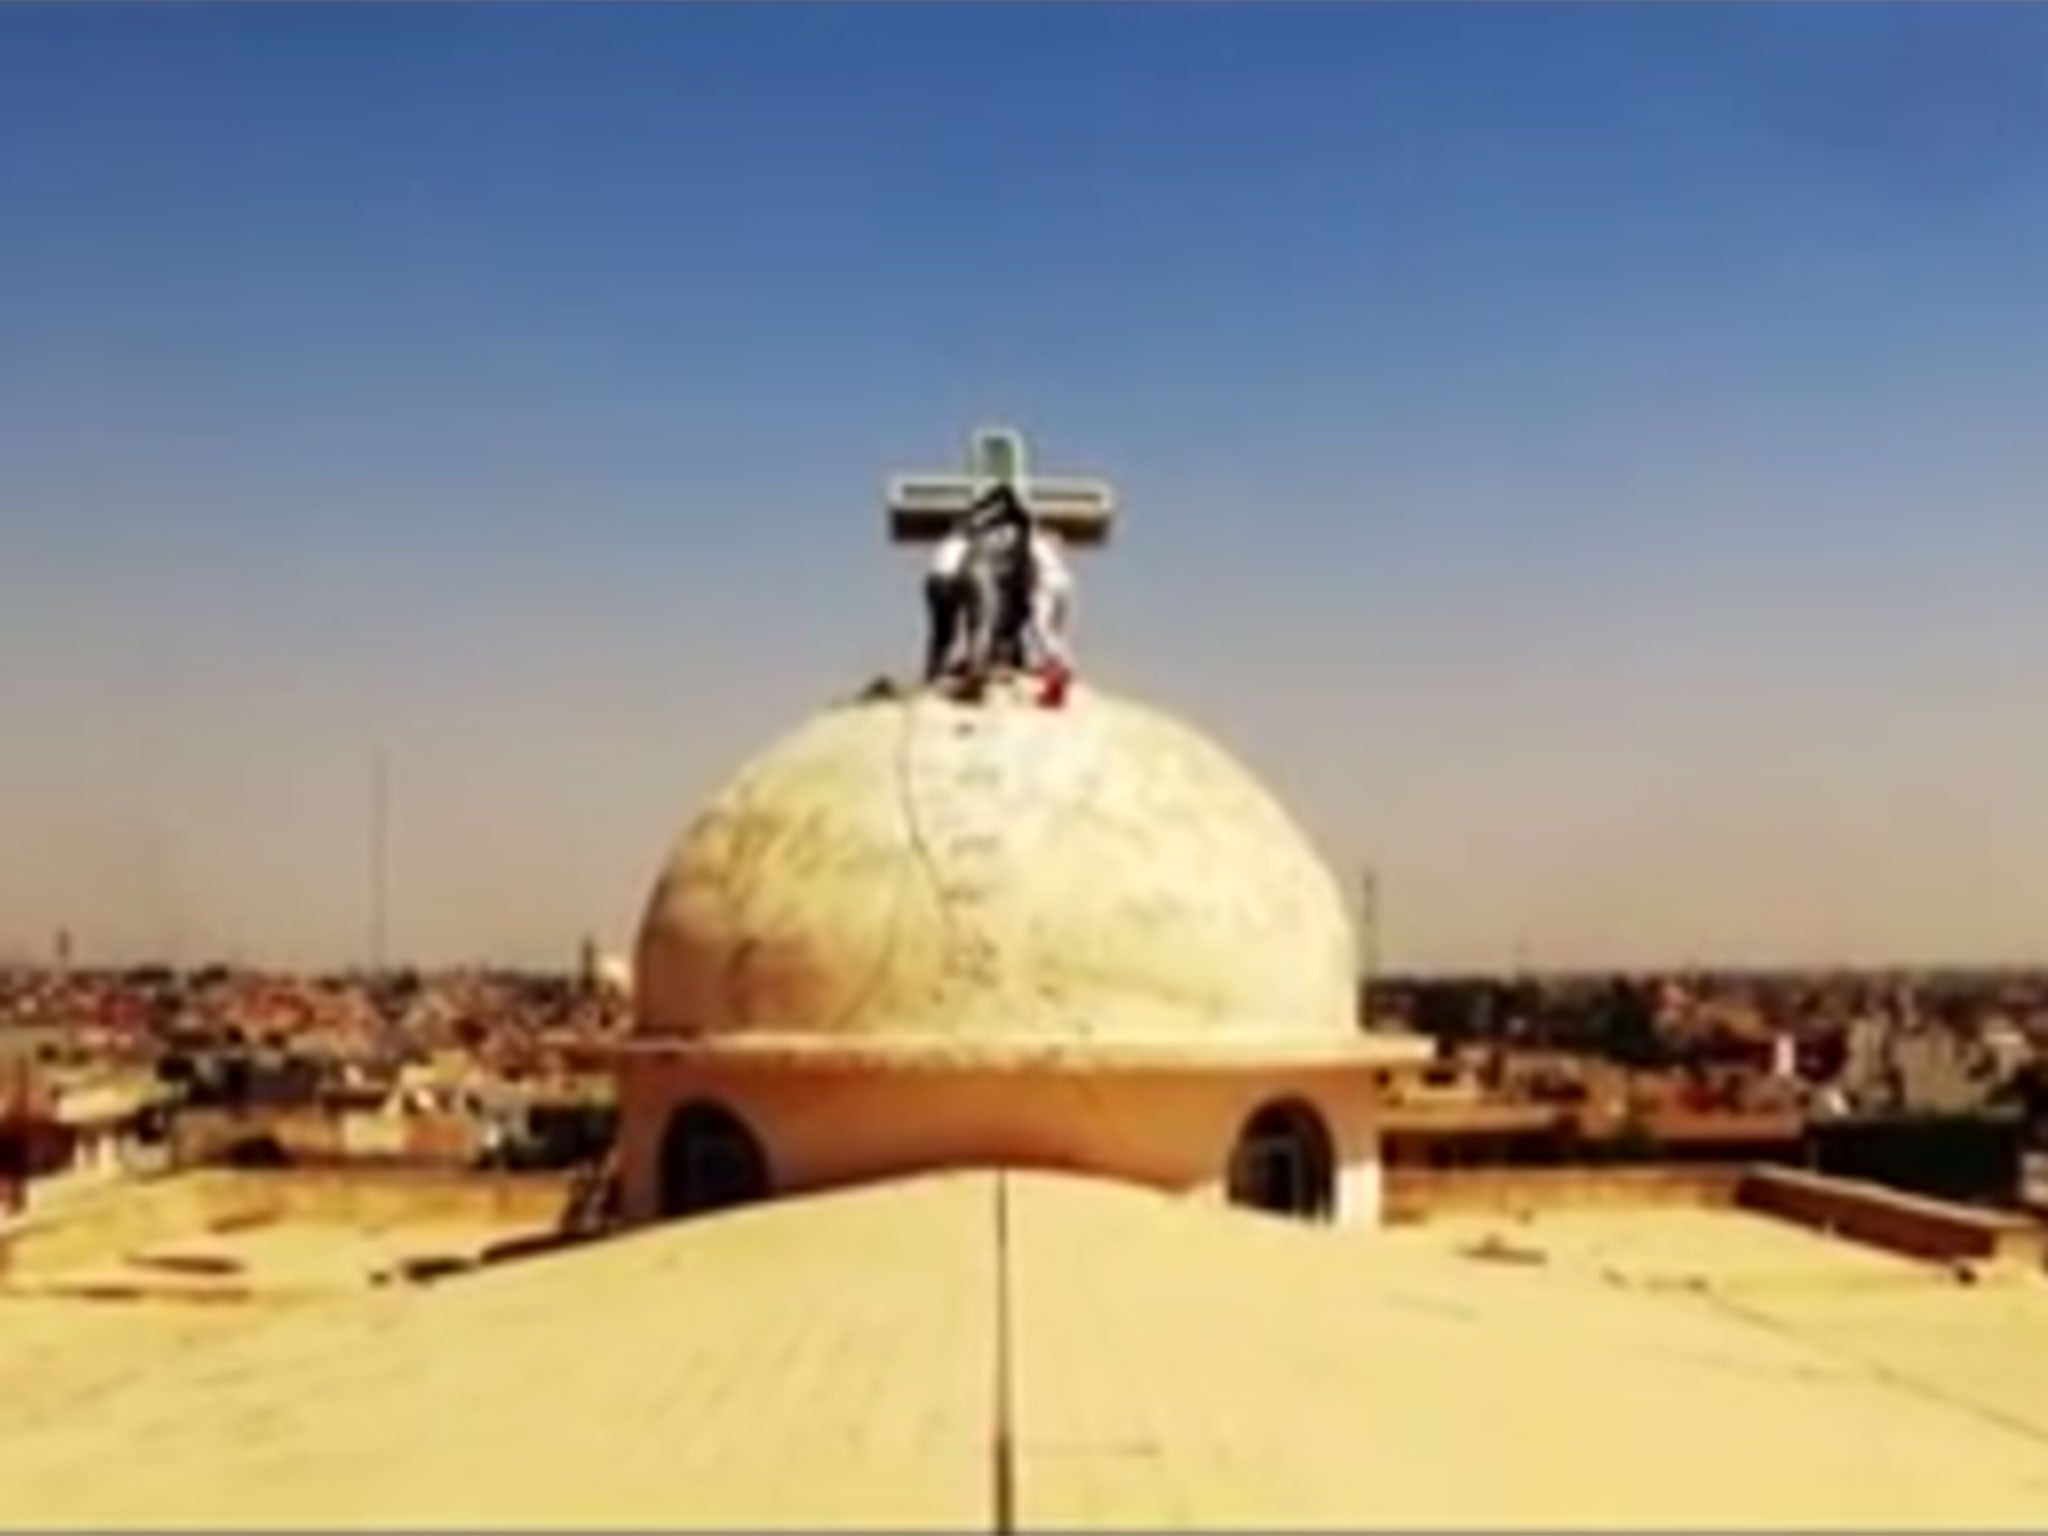 The new video showed Isis militants tearing crosses from Christian churches